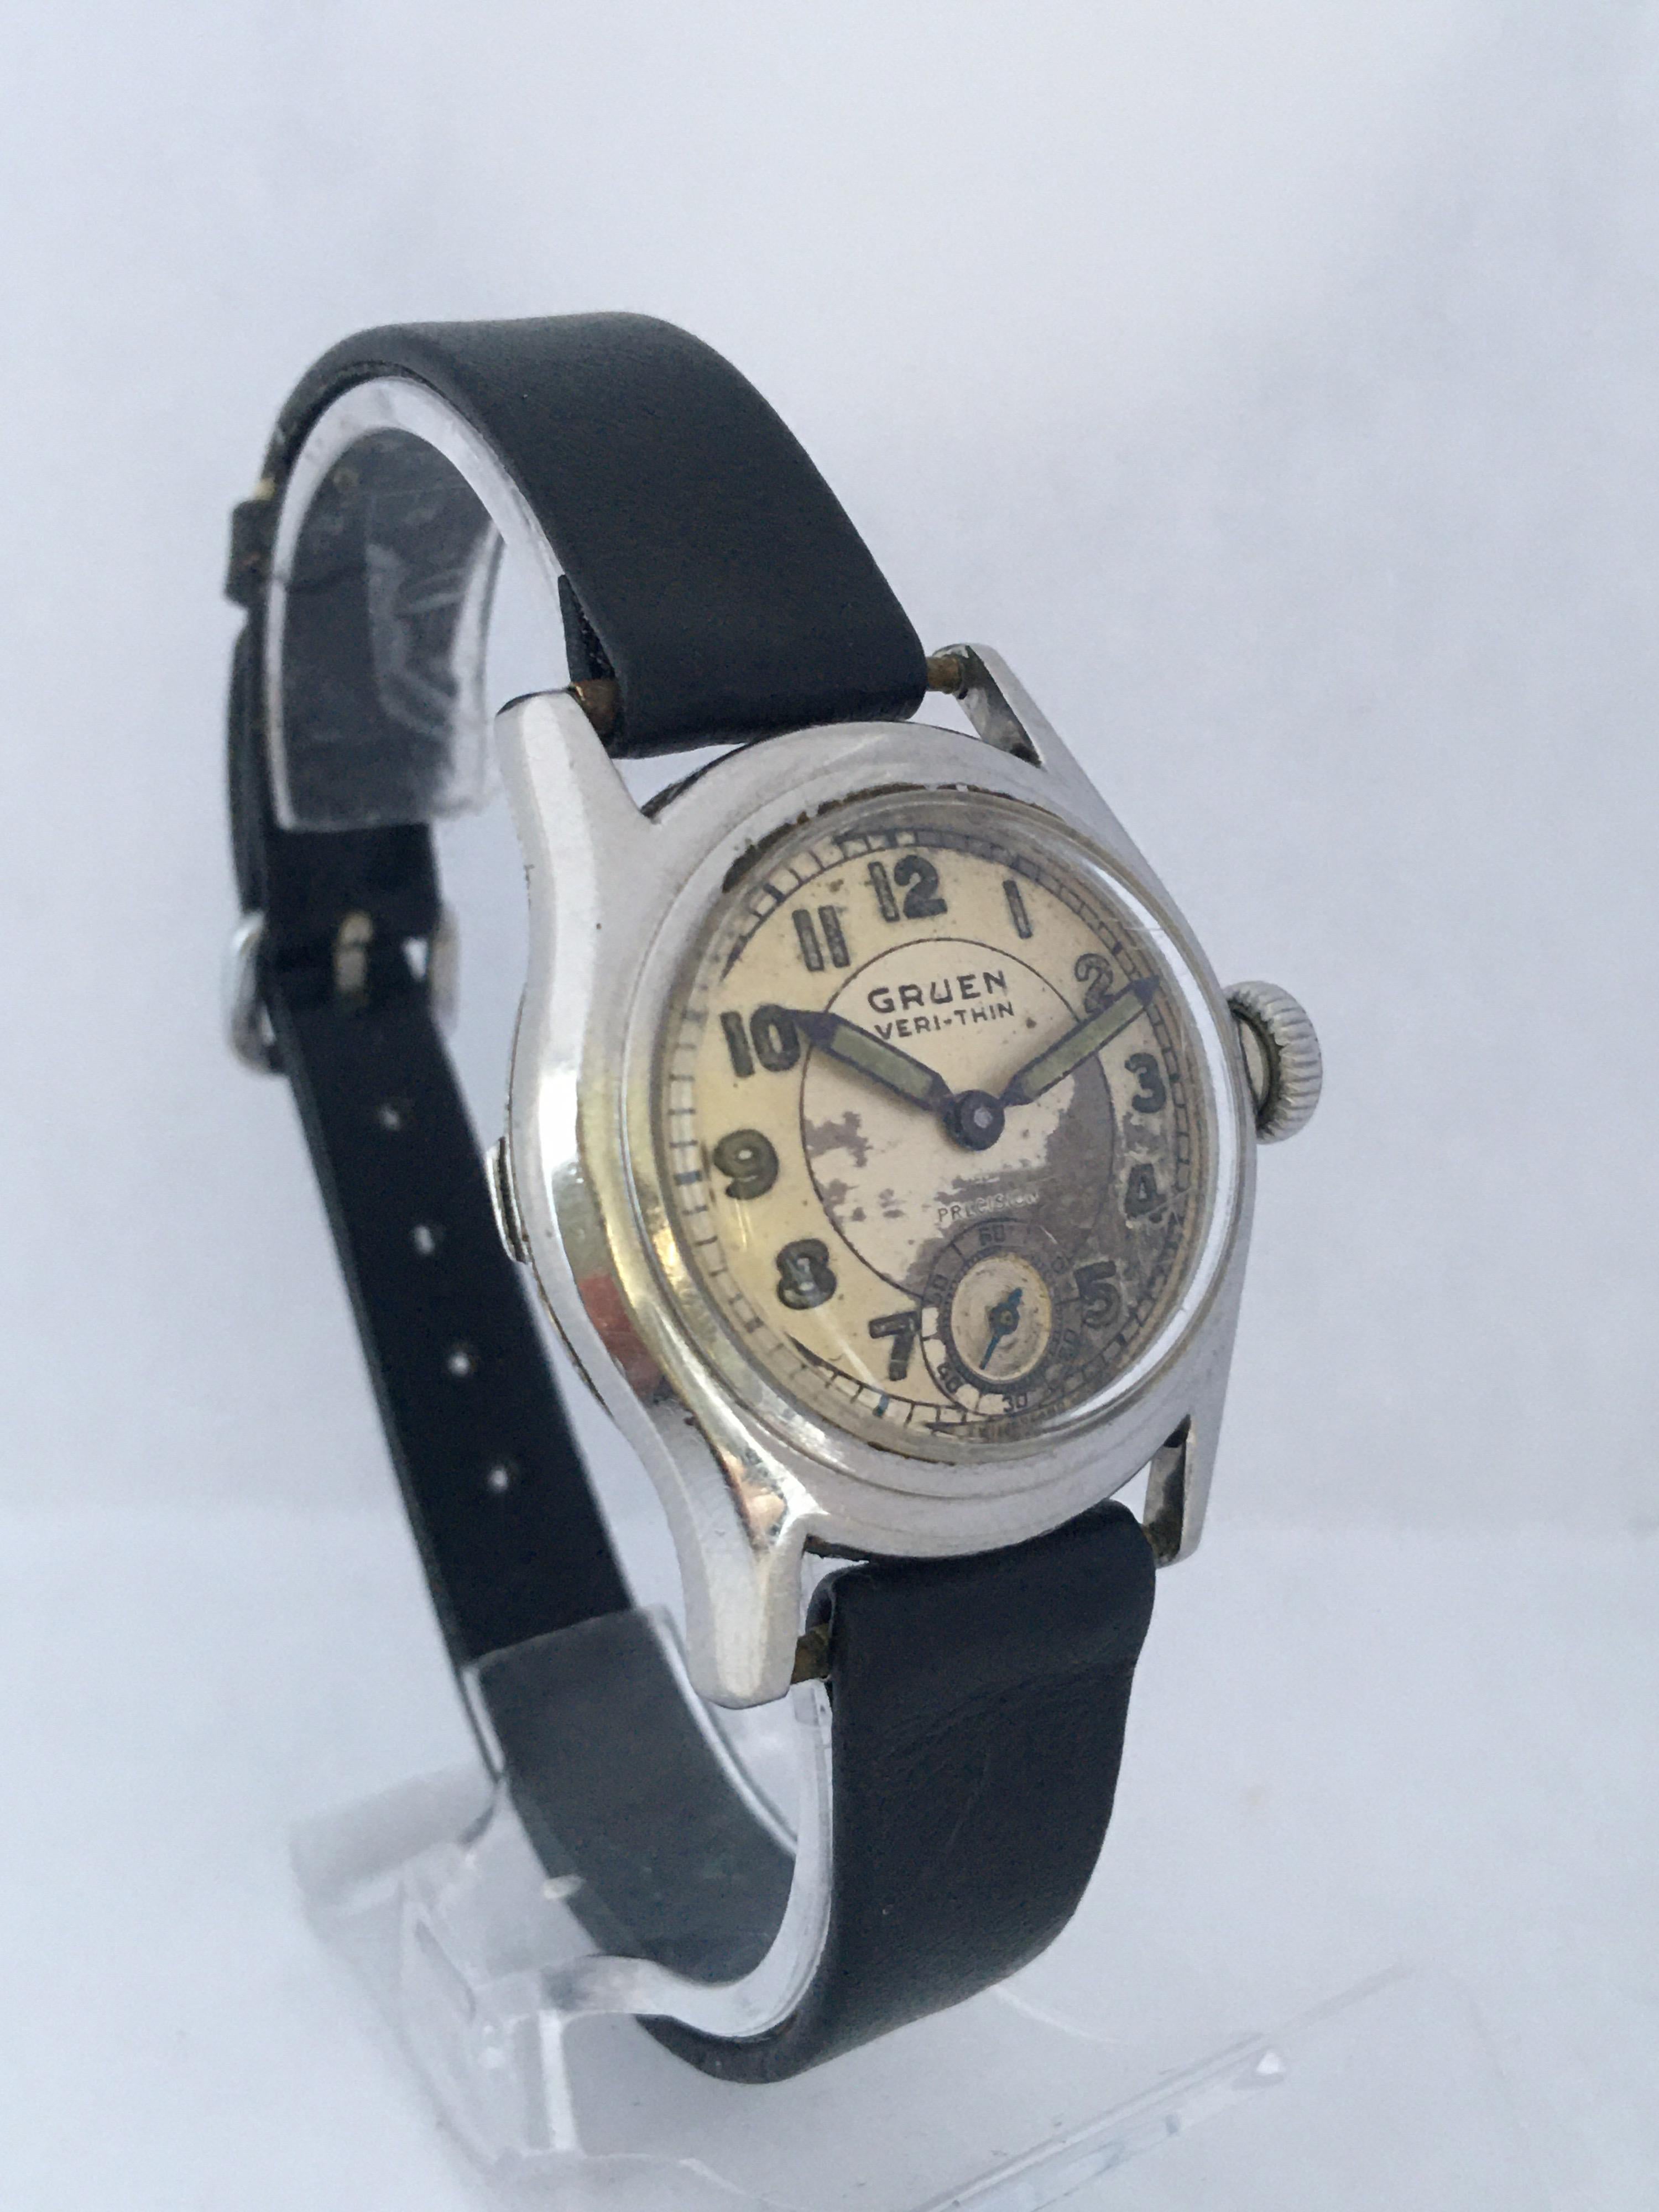 This 29mm pre-owned hand winding vintage watch is working and it is running well. There are visible signs of ageing with the silvered dial is tarnished as shown. Light scratches on the watch case as shown. Please study the images carefully as form